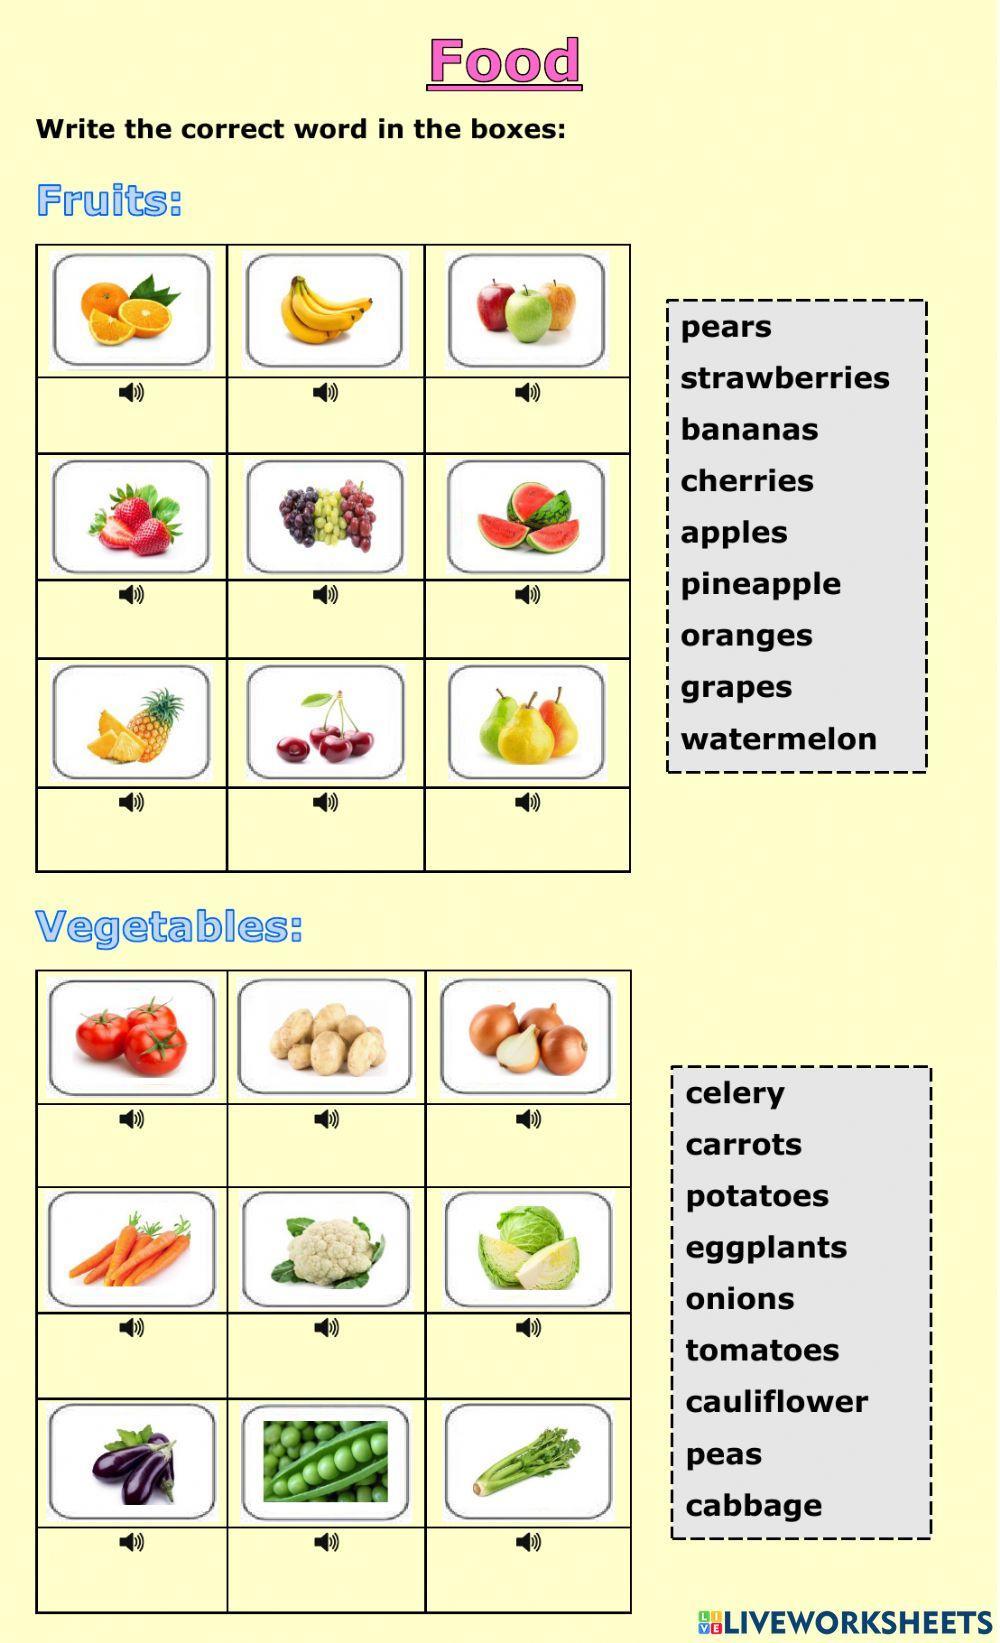 Food - Fruits, vegetables and drinks